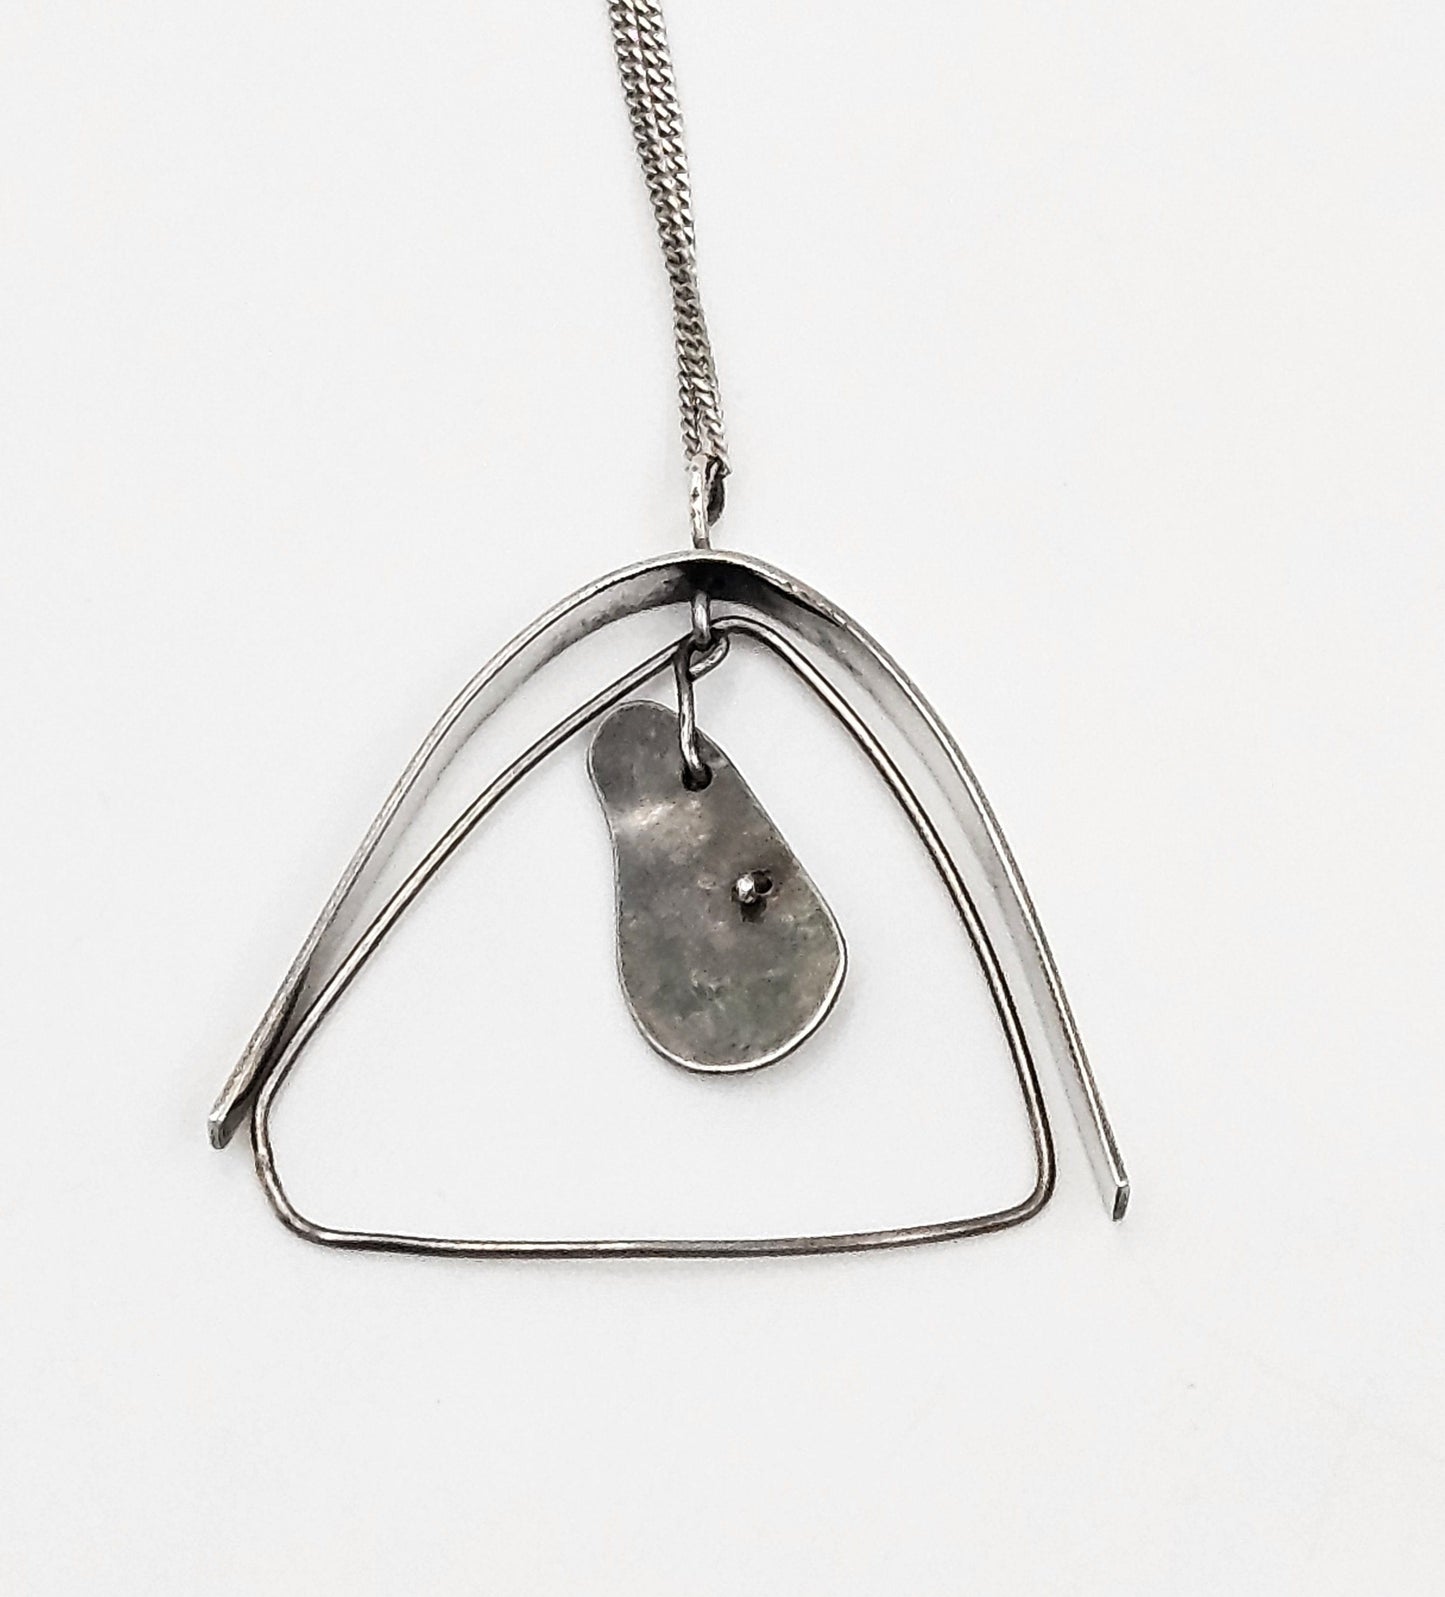 TMCMH Jewelry Abstract Modernist Kinetic Sterling Silver Pendant Necklace